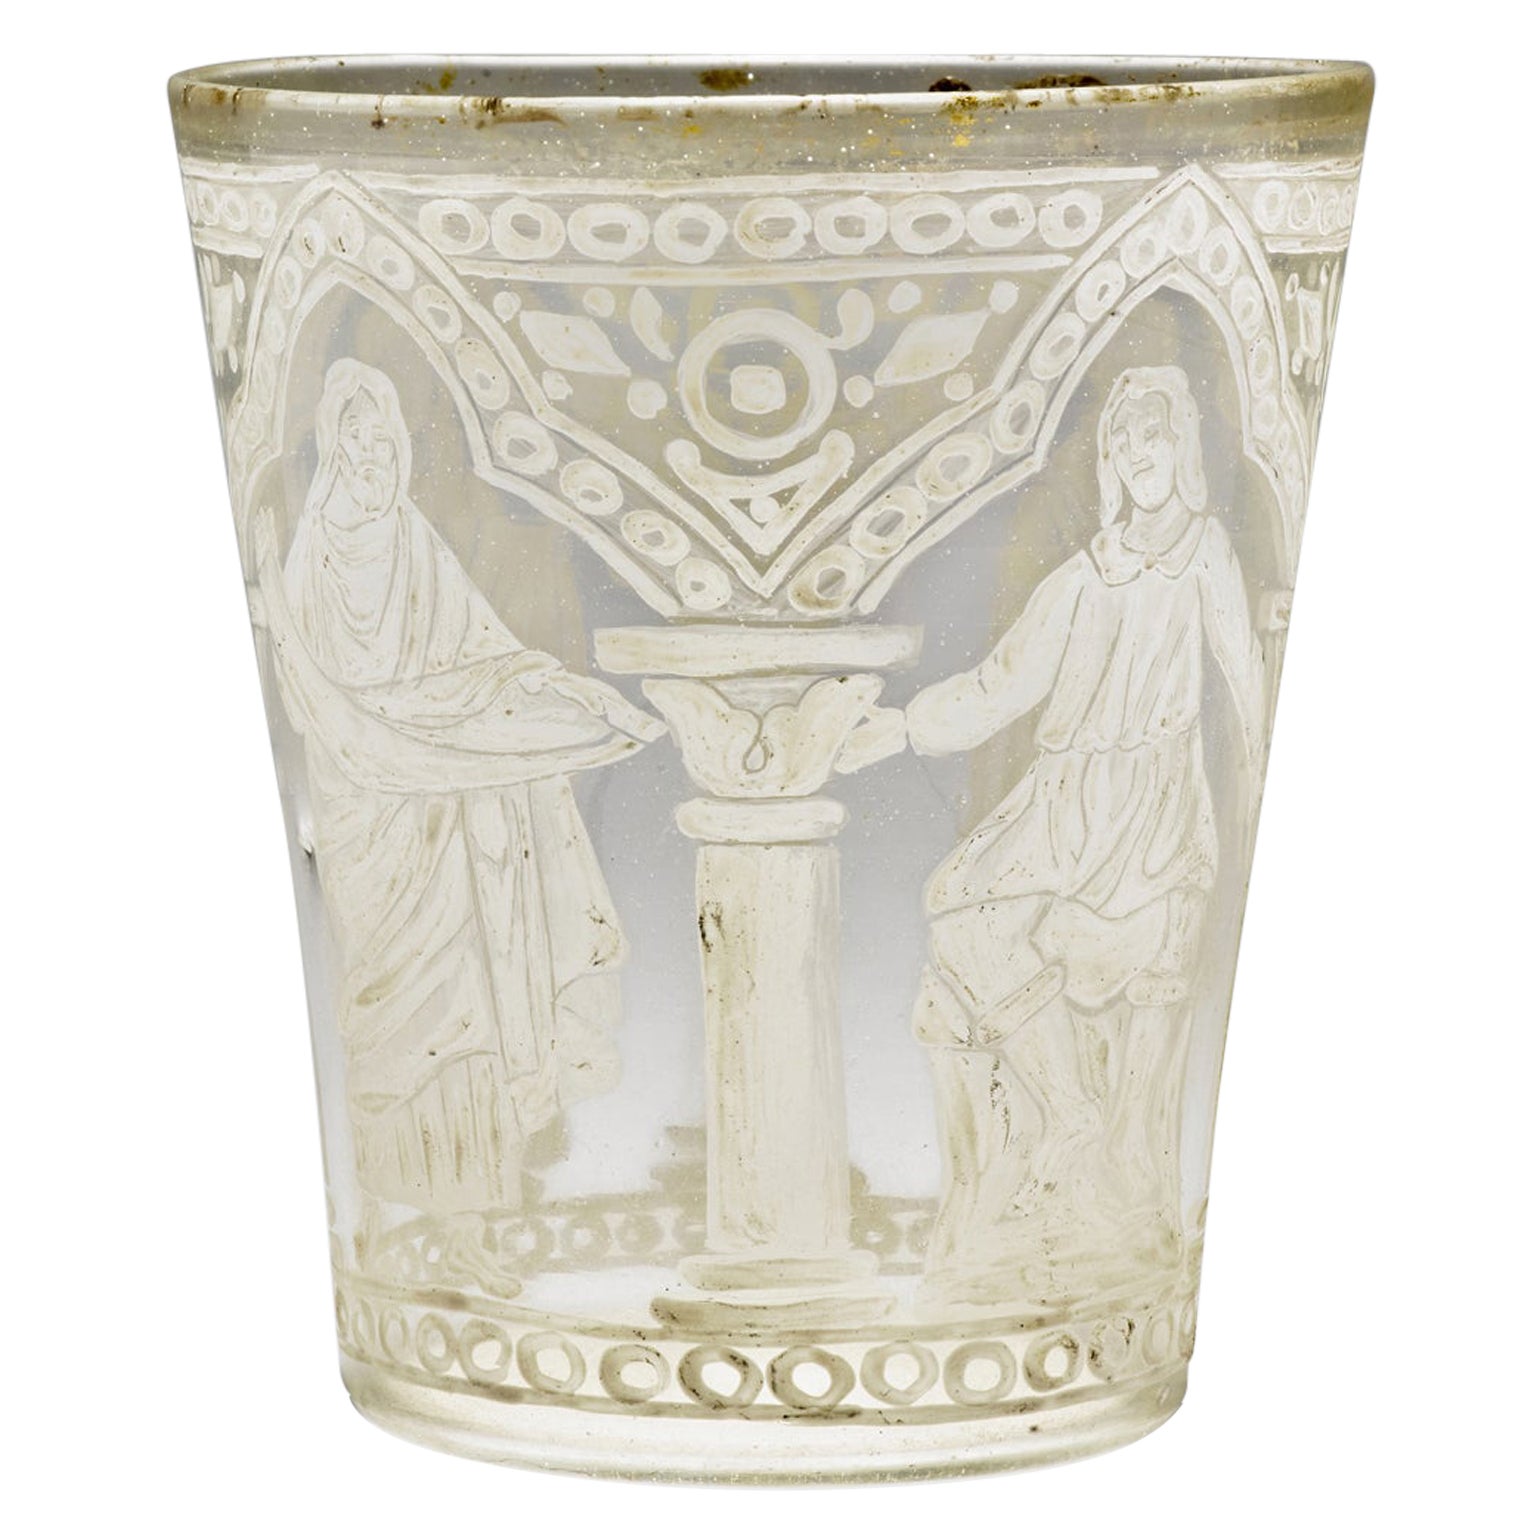 Beaker Blown Glass with Decoration of Classical Scenes is attributed to Salviati